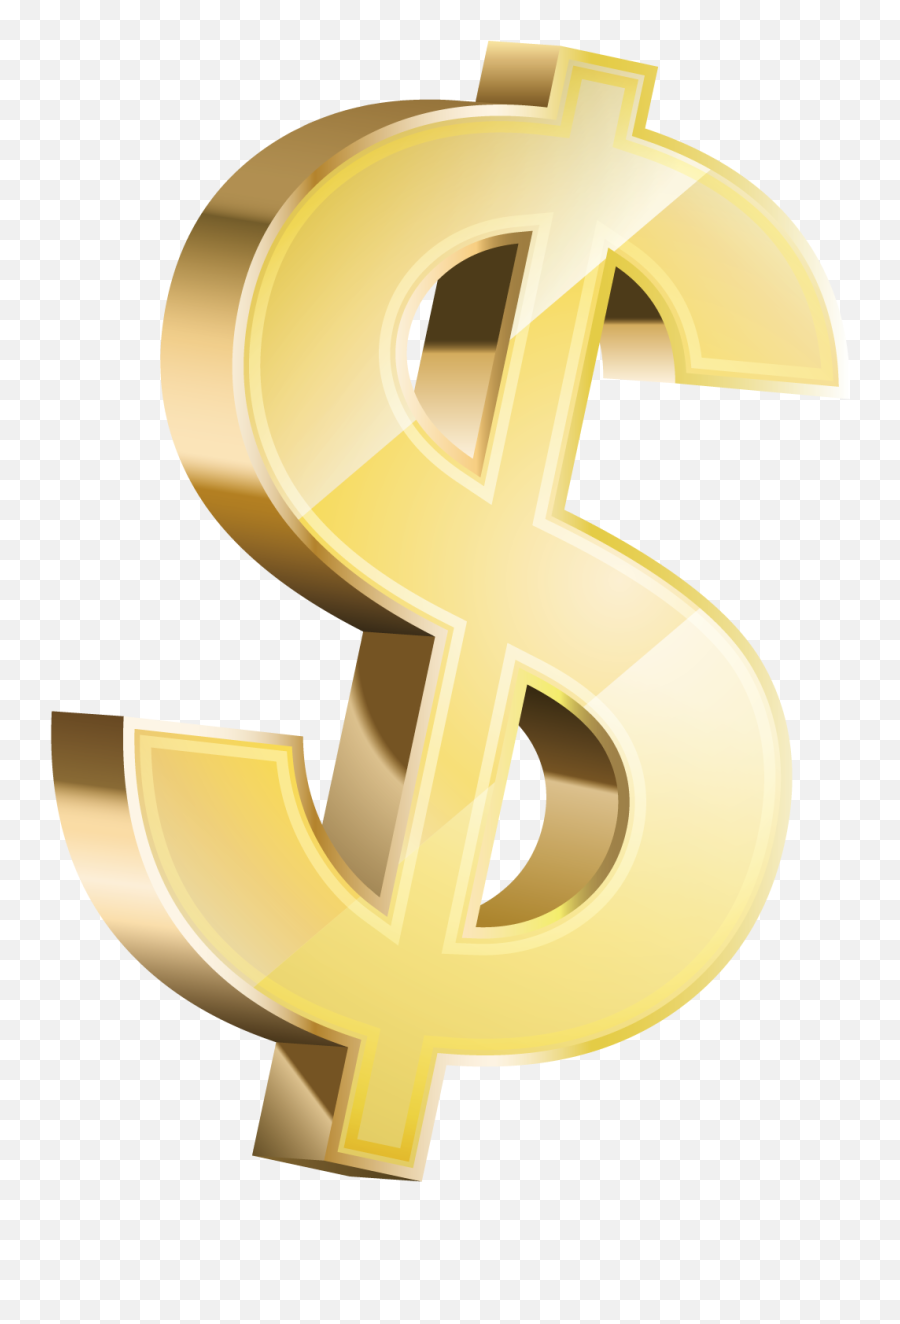 Dollar Sign Bank Currency Symbol Coin - Gold Dollar Sign Transparent Png,Dollar Sign Transparent